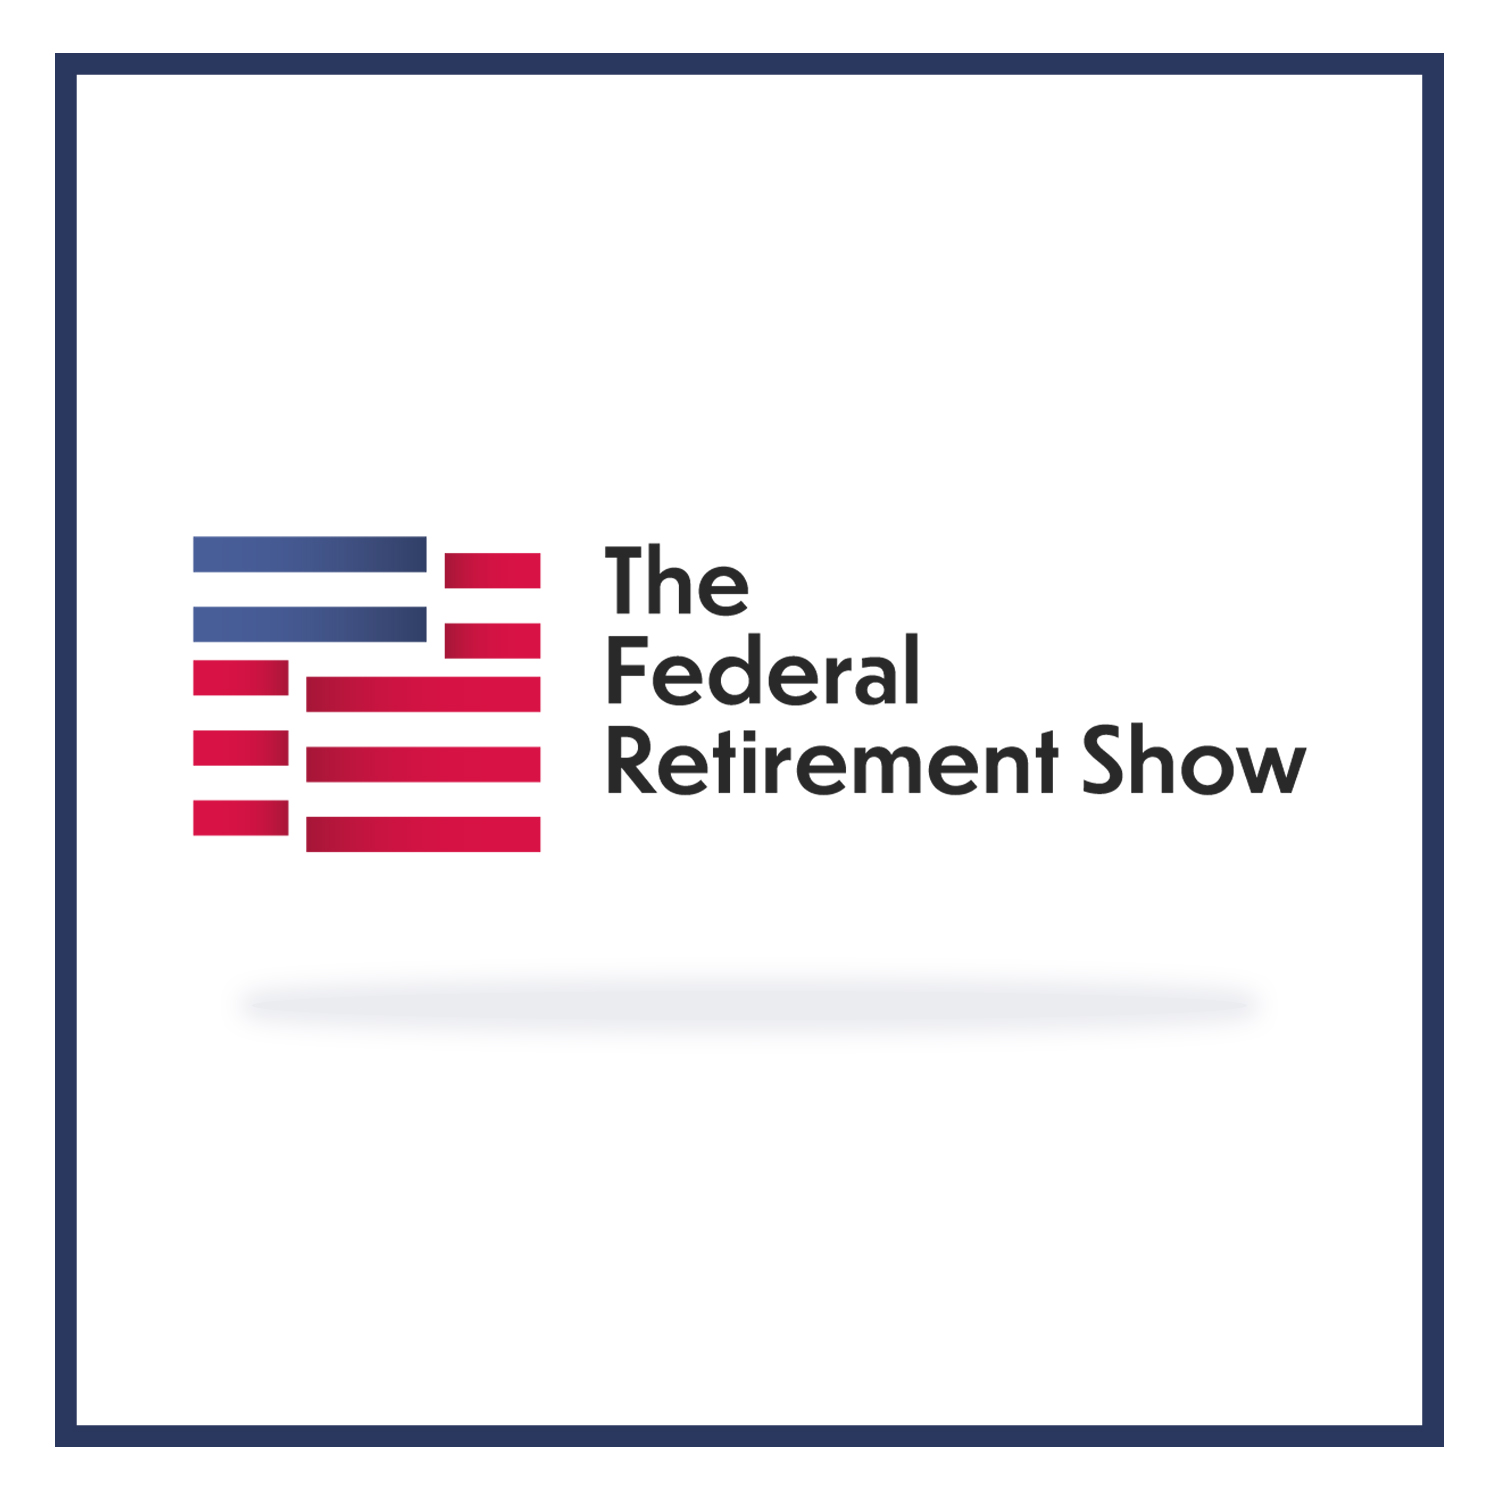 Are You Ready to Retire as a Federal Employee?